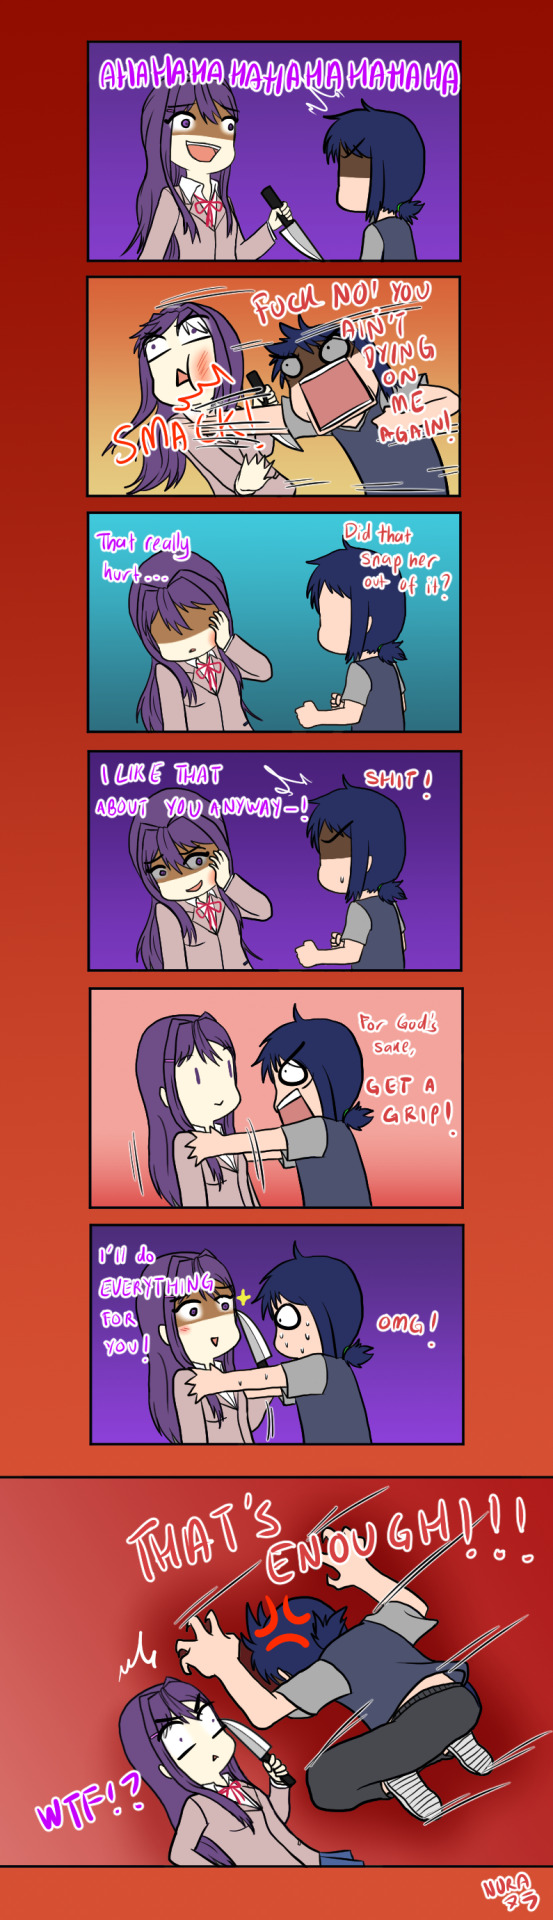 Based on DDLC Mod.
Yuri can be a handful but I’m more than willing to whack her to stop her from killing herself.
By the way, it’s true that MC jumps on Yuri to stop her.